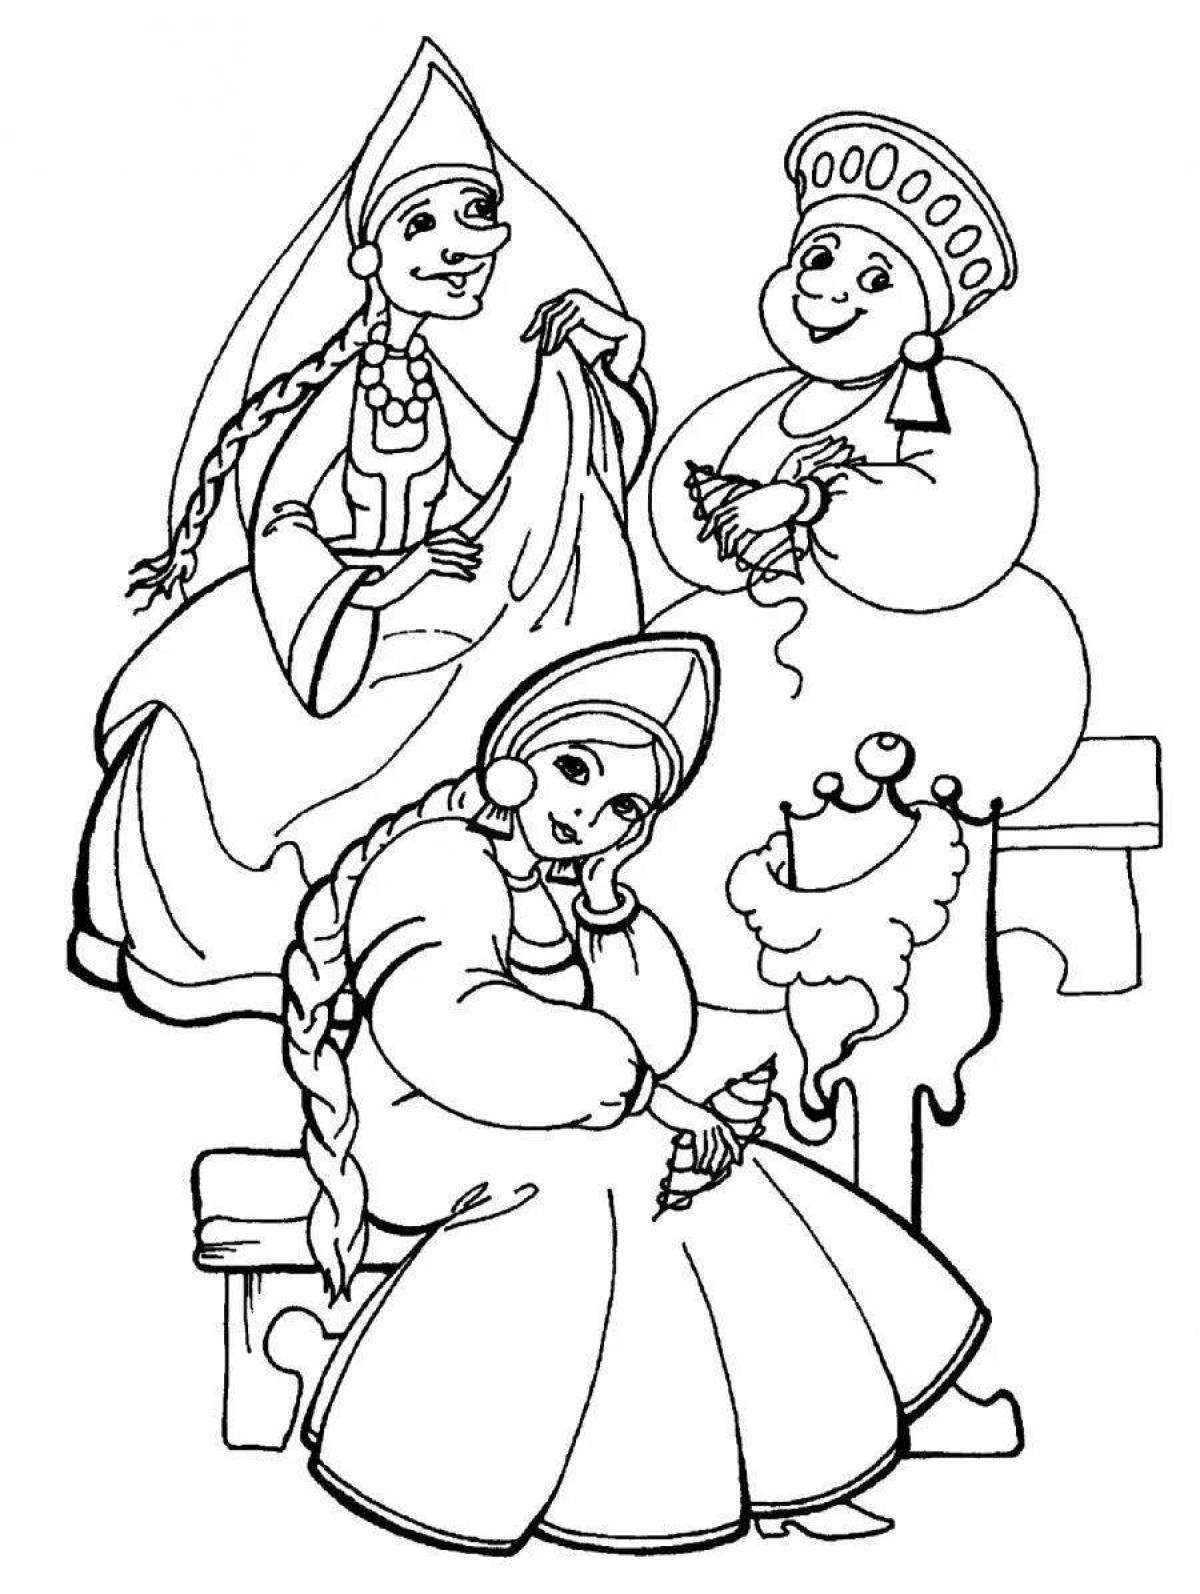 Pushkin's charming coloring book for children